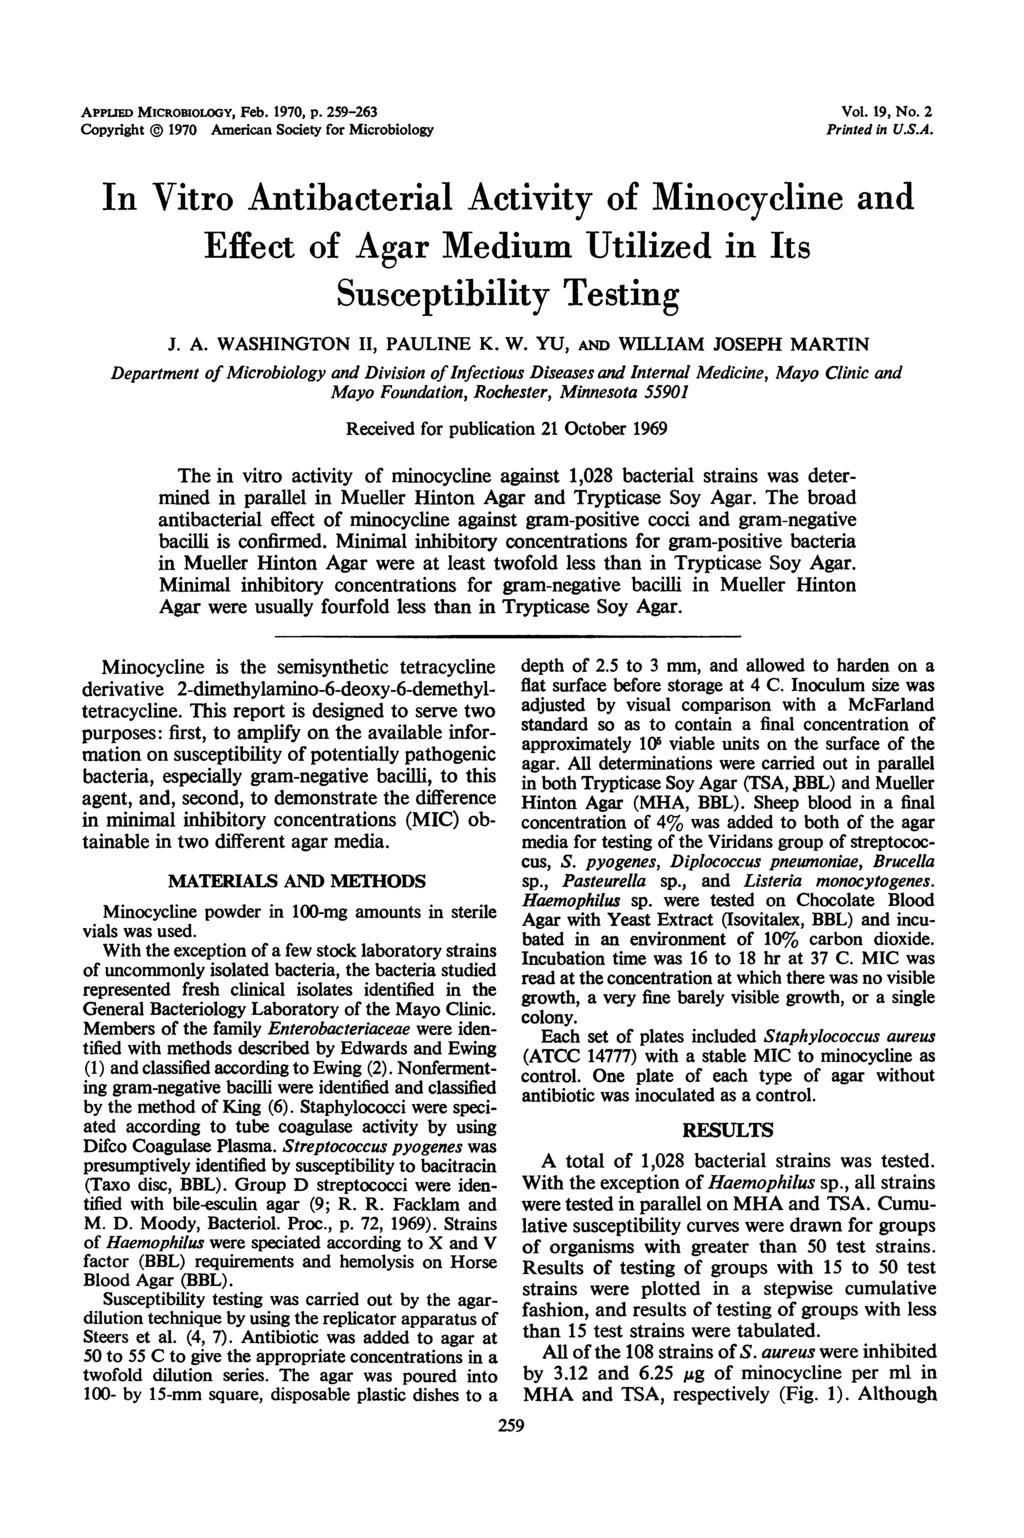 APPLTE MICROBIOLOGY, Feb. 1970, p. 259-263 Copyright 1970 American Society for Microbiology Vol. 19, No. 2 Printed in U.S.A. In Vitro Antibacterial Activity of Minocycline and Effect of Agar Medium Utilized in Its Susceptibility Testing J.